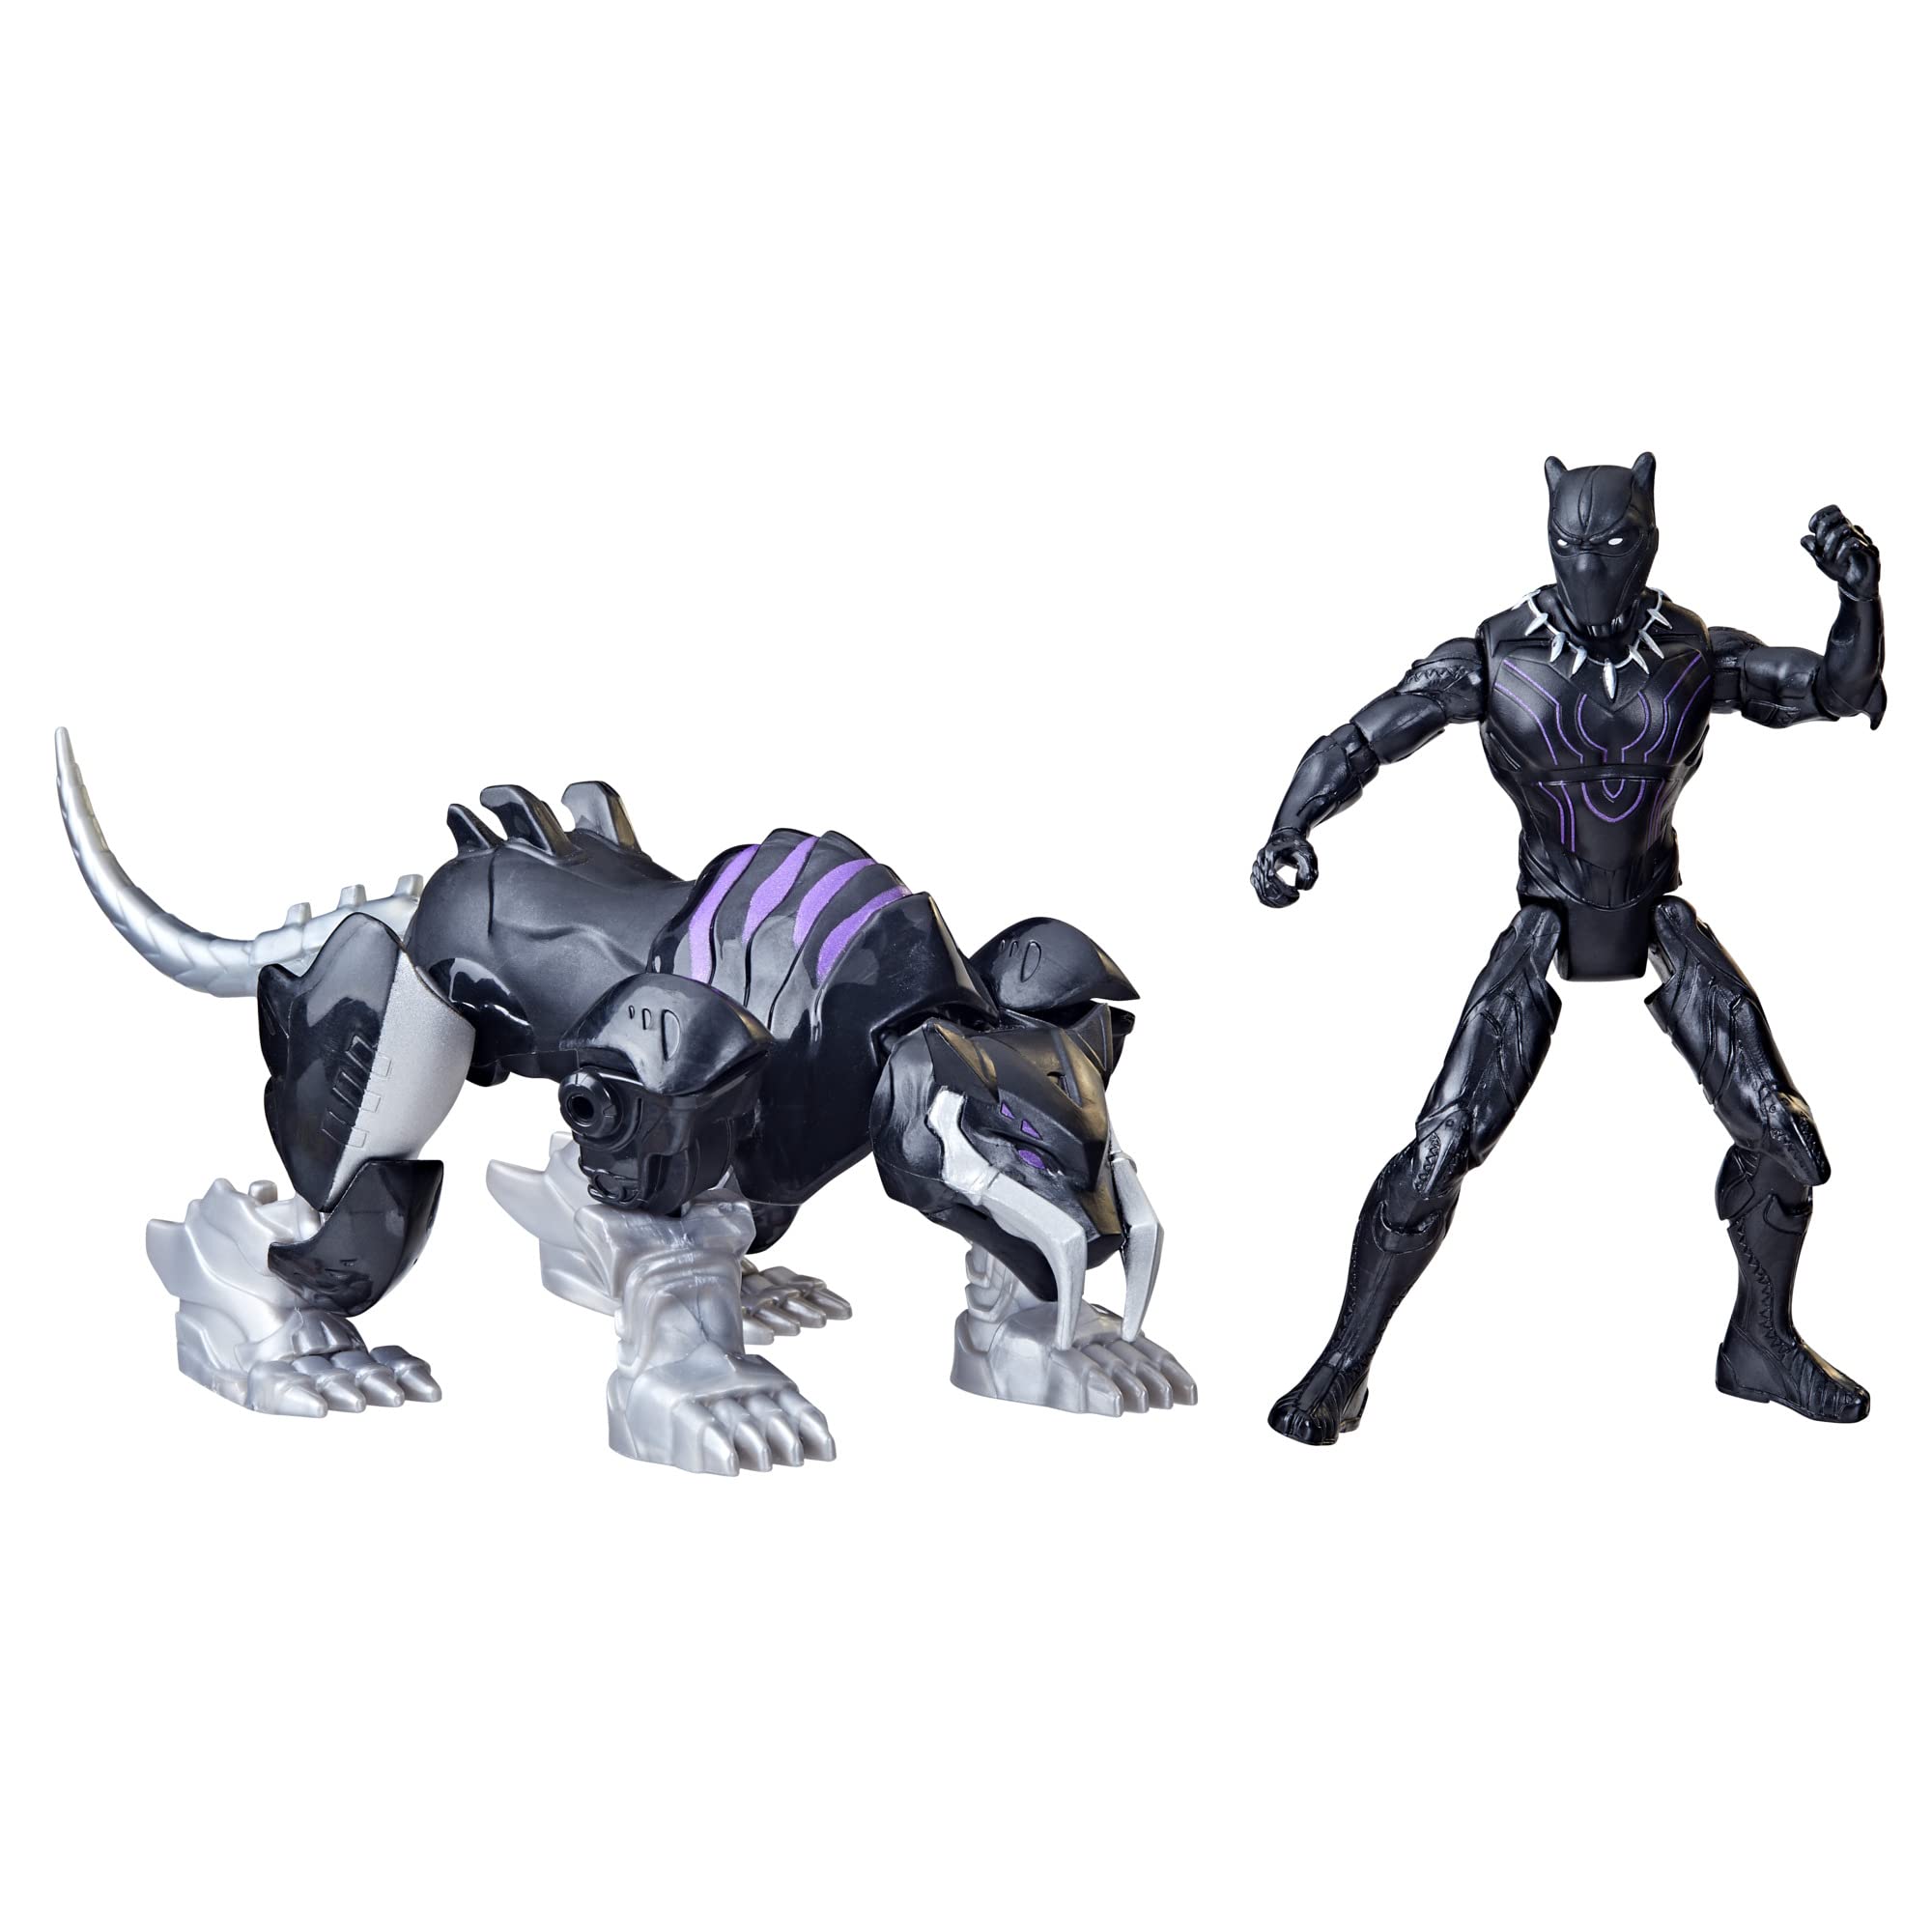 Black Panther with Sabre Claw